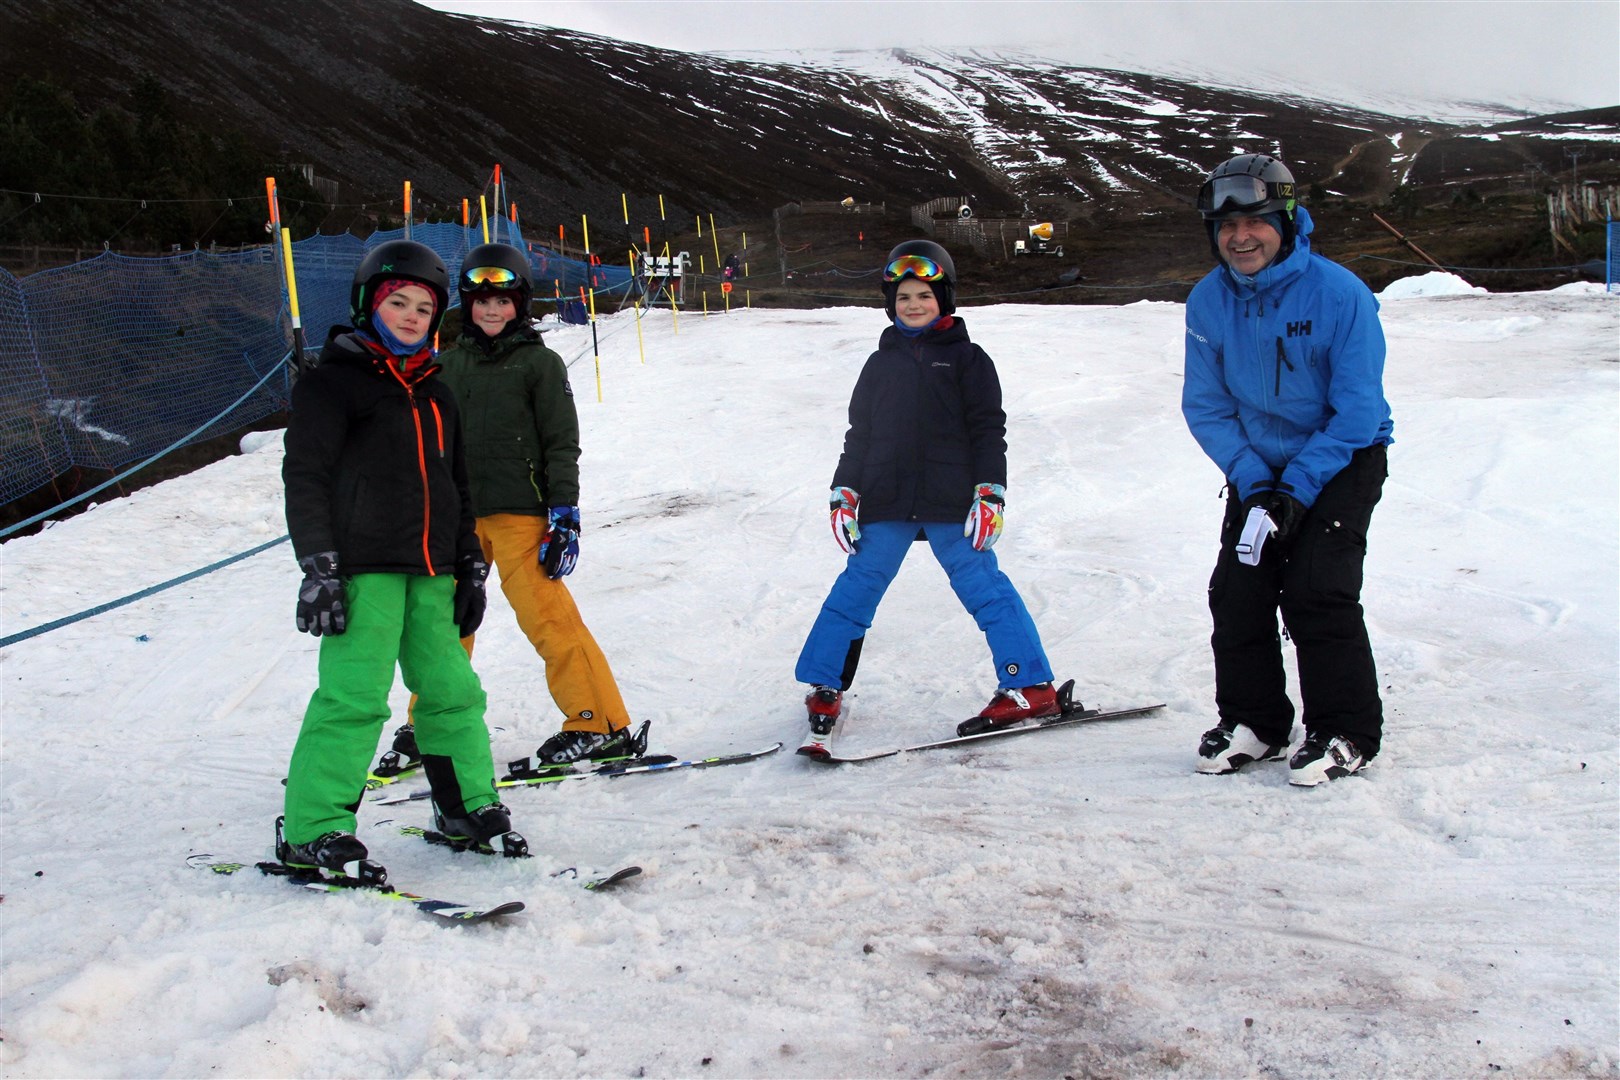 Aviemore-based Free Ski's instructor Mark Cox with three of their customers on Saturday.